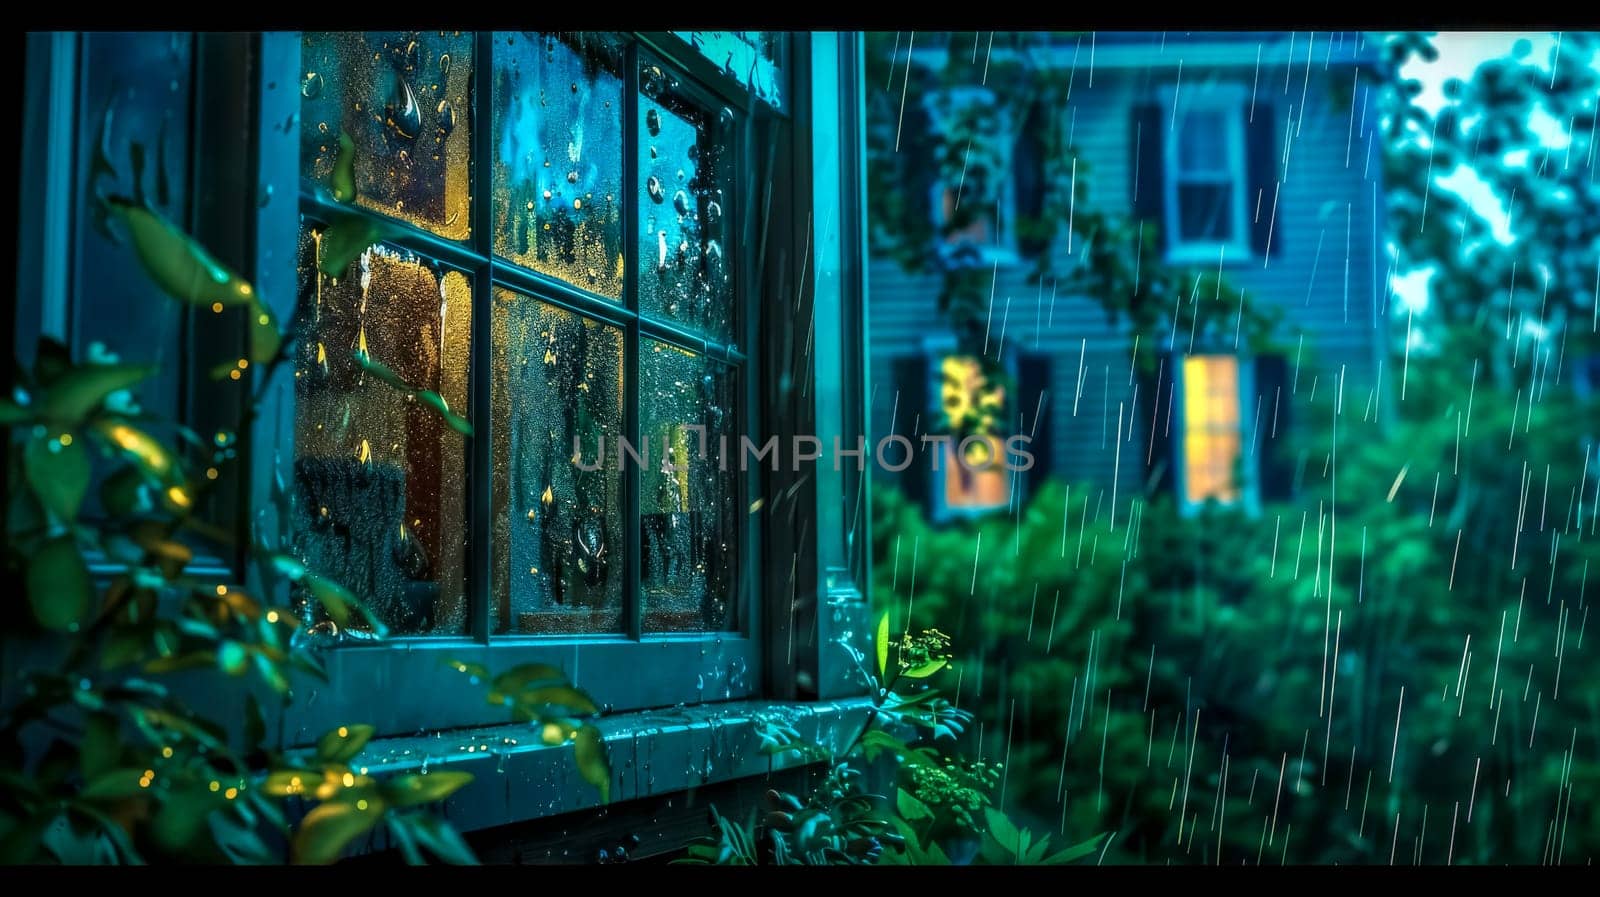 Warm indoor light filters through a rain-speckled window on a tranquil, blue-hued evening